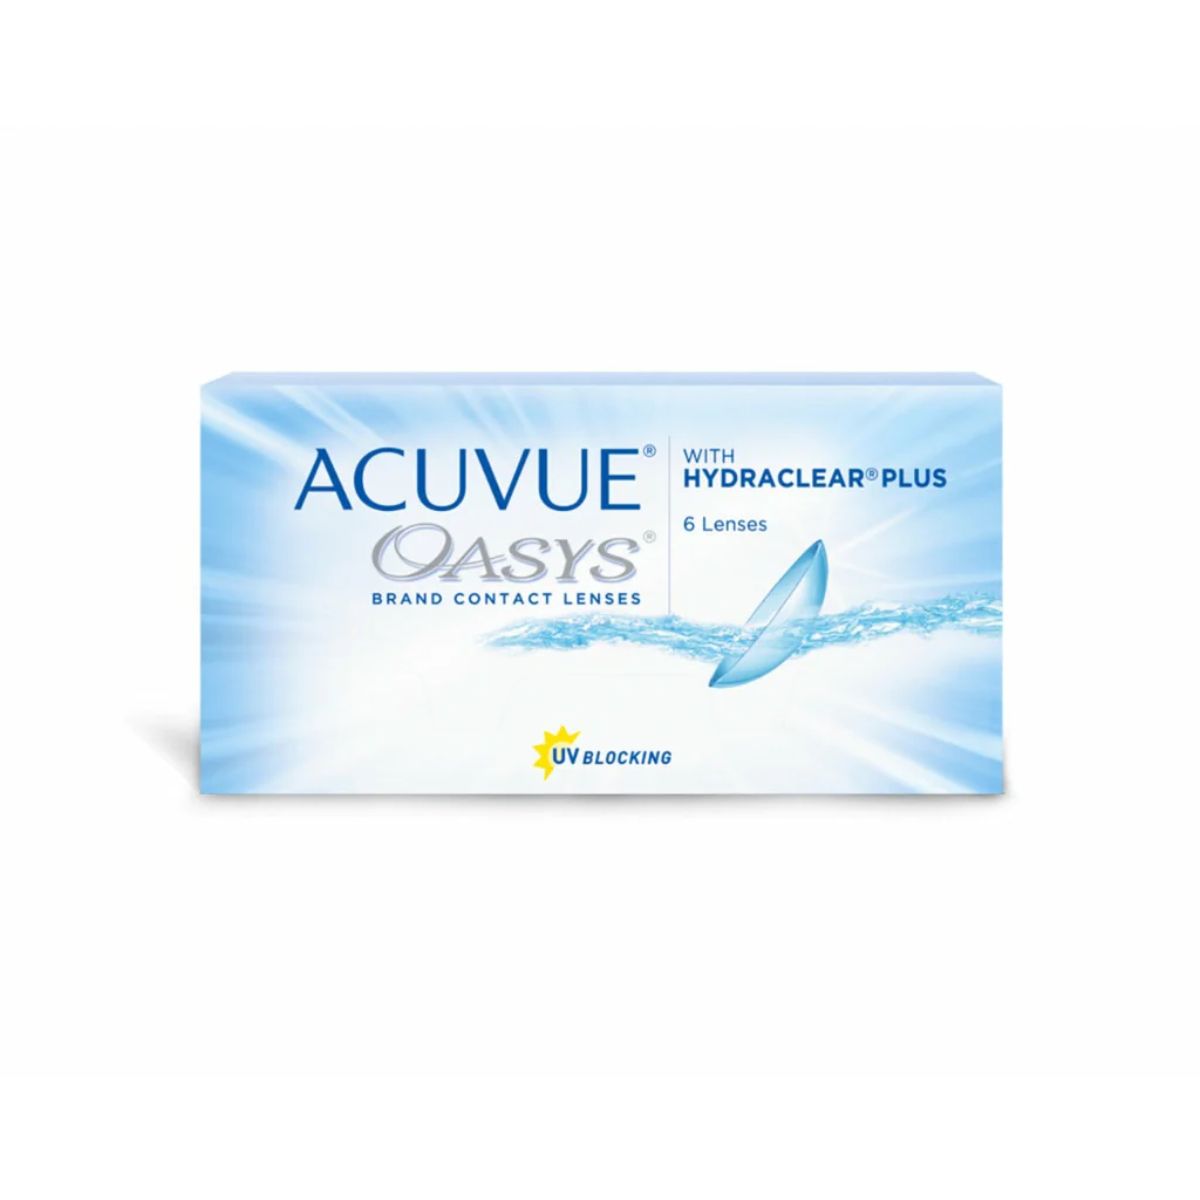 "Buy Acuvue Oasys with Hydraclear Plus (6 Lenses) | Jhonson & Johnson conatct lense "